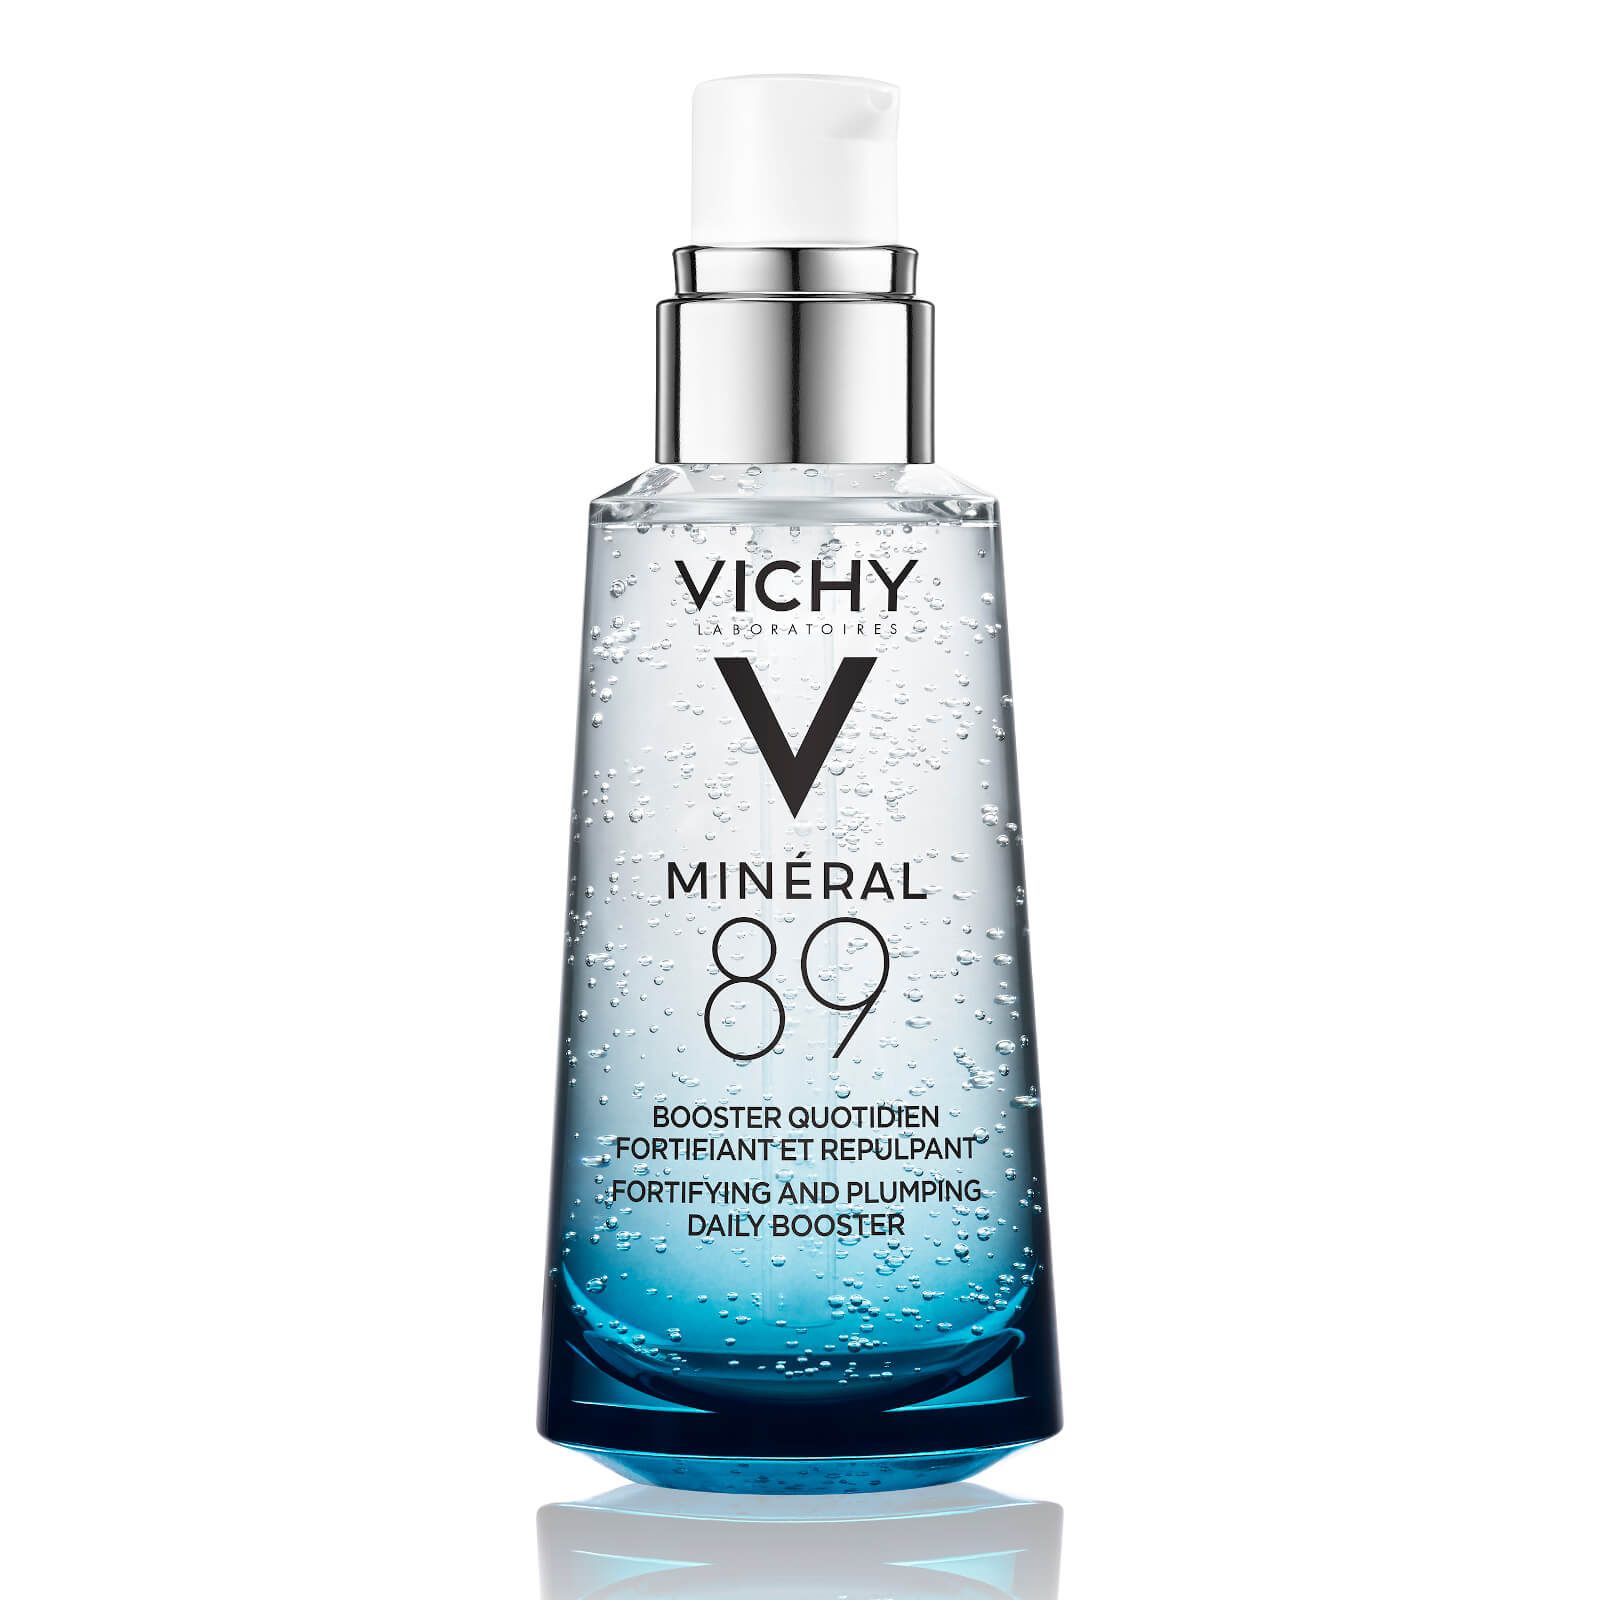 VICHY Minéral 89 Hyaluronic Acid Hydration Booster 50ml | Look Fantastic (UK)